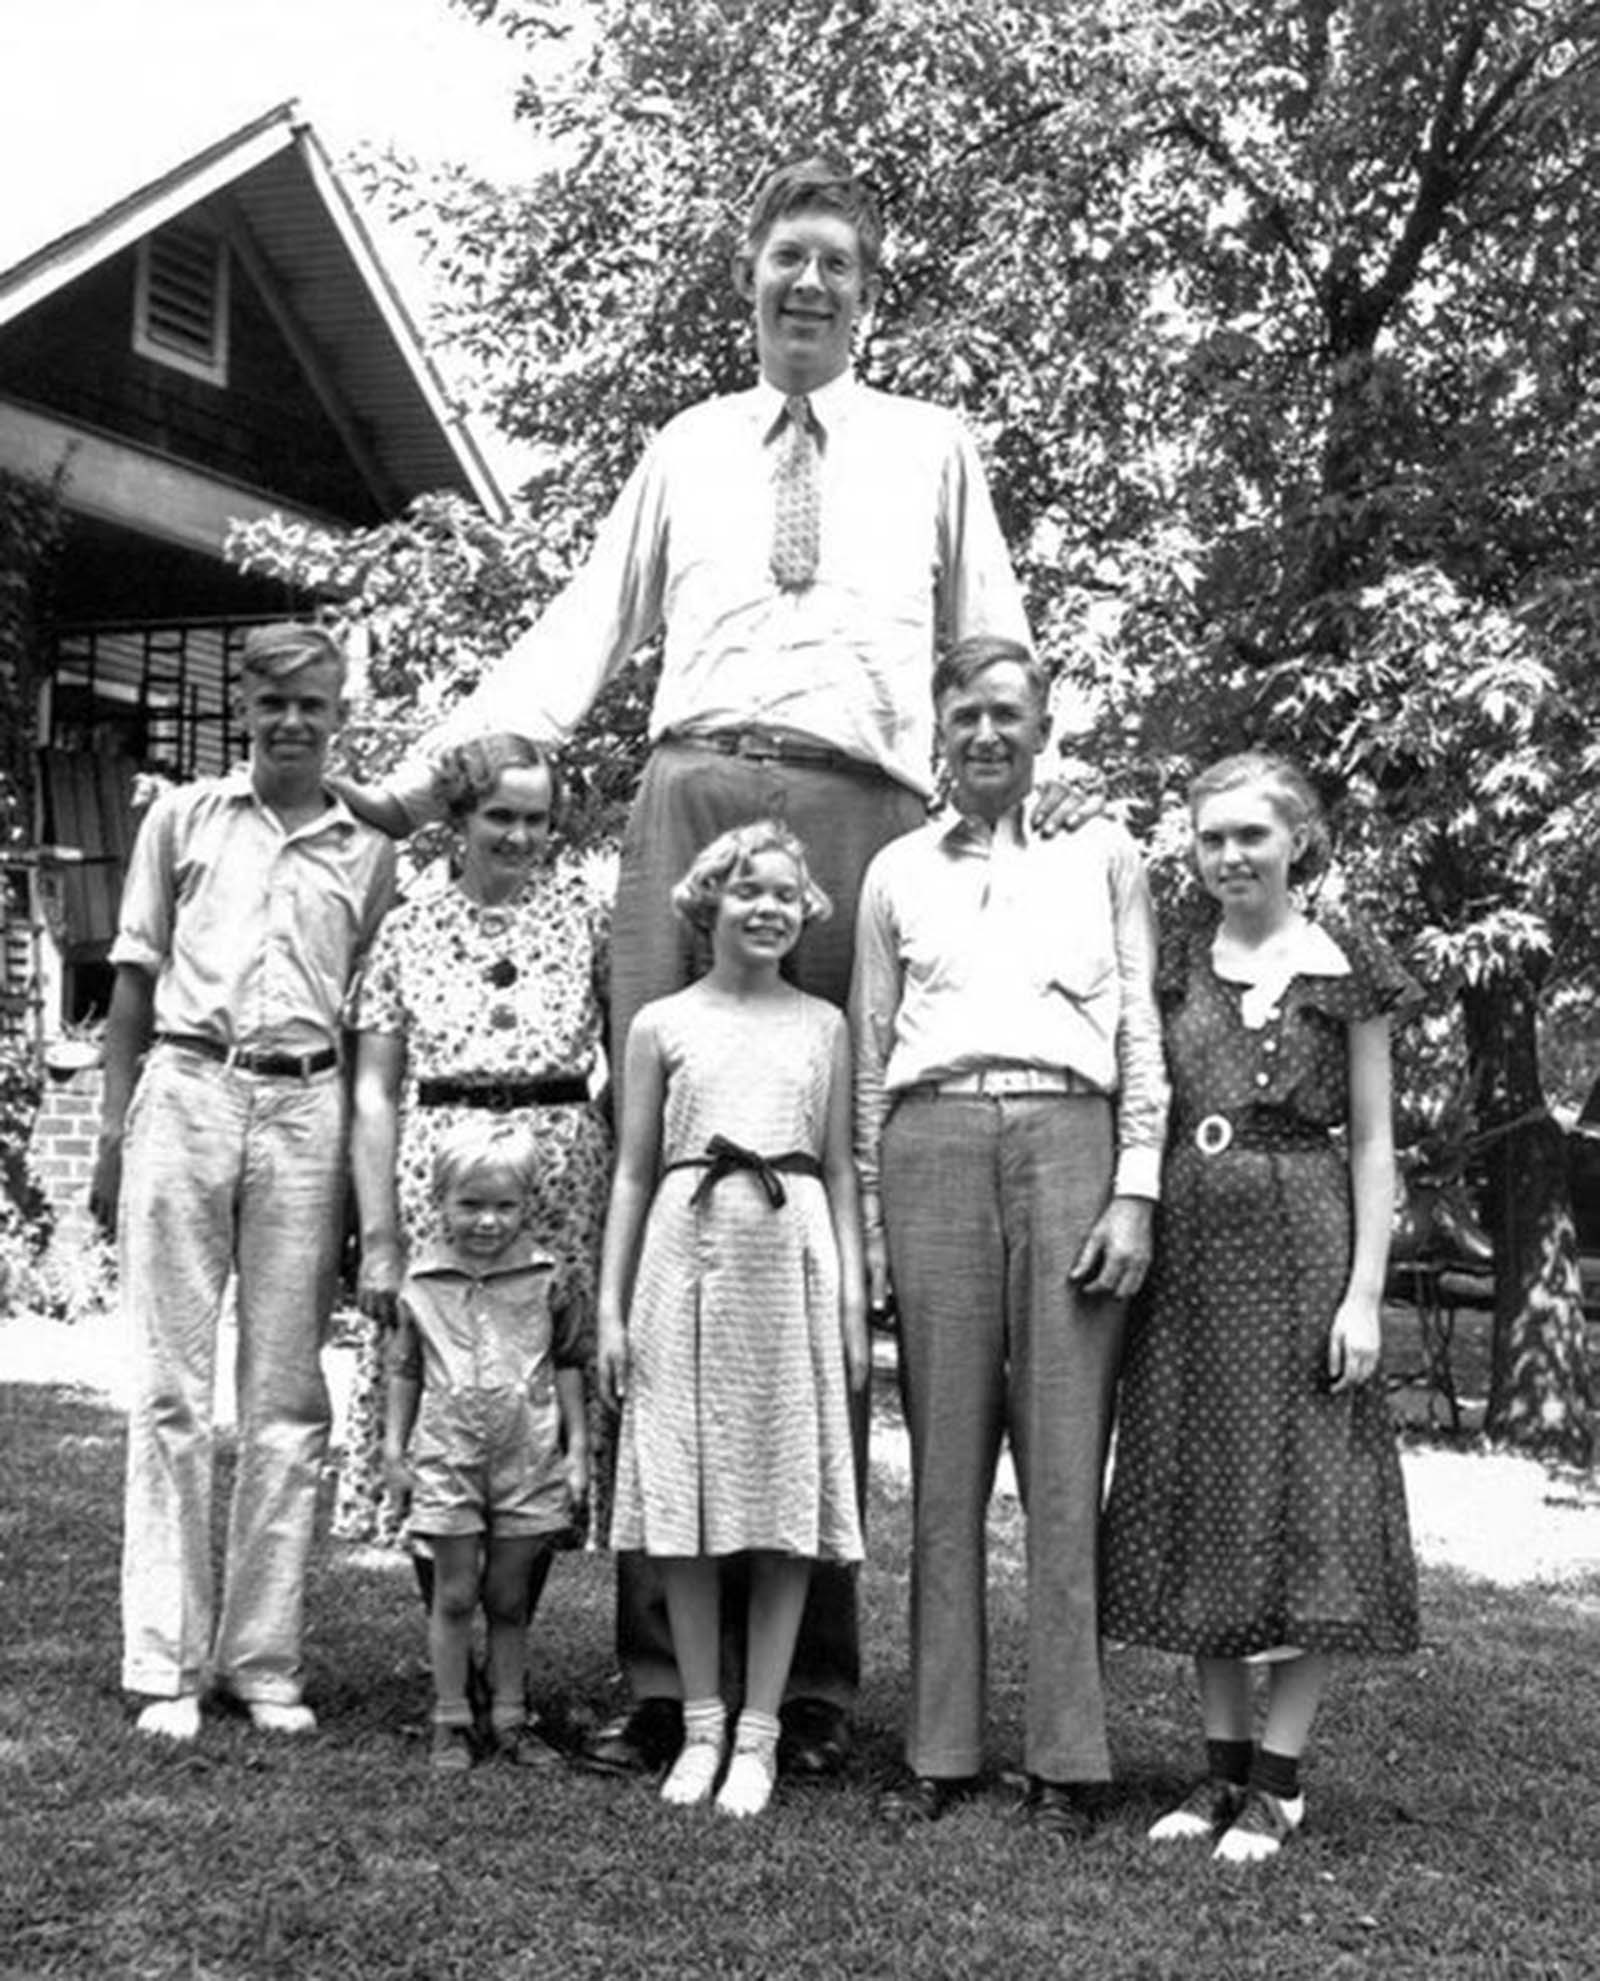 Robert with his family in 1935.